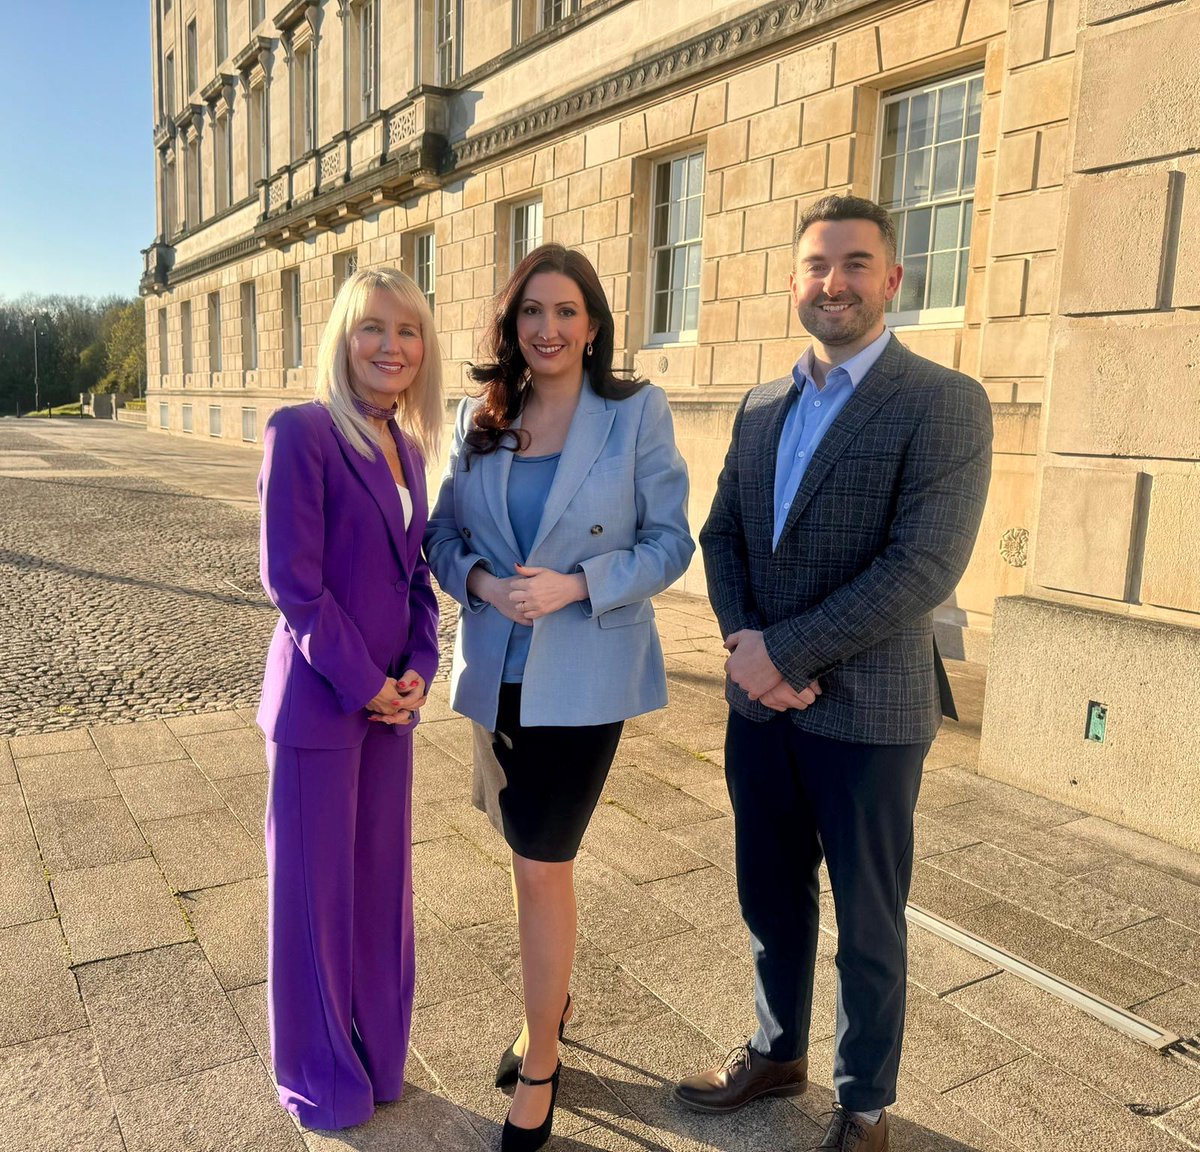 Deputy First Minister Emma Little-Pengelly attended an event at Parliament Buildings last night showcasing the “Striving Towards a Restorative Society” (STARS) project aimed at embedding restorative practice within communities. She congratulated those involved in the project